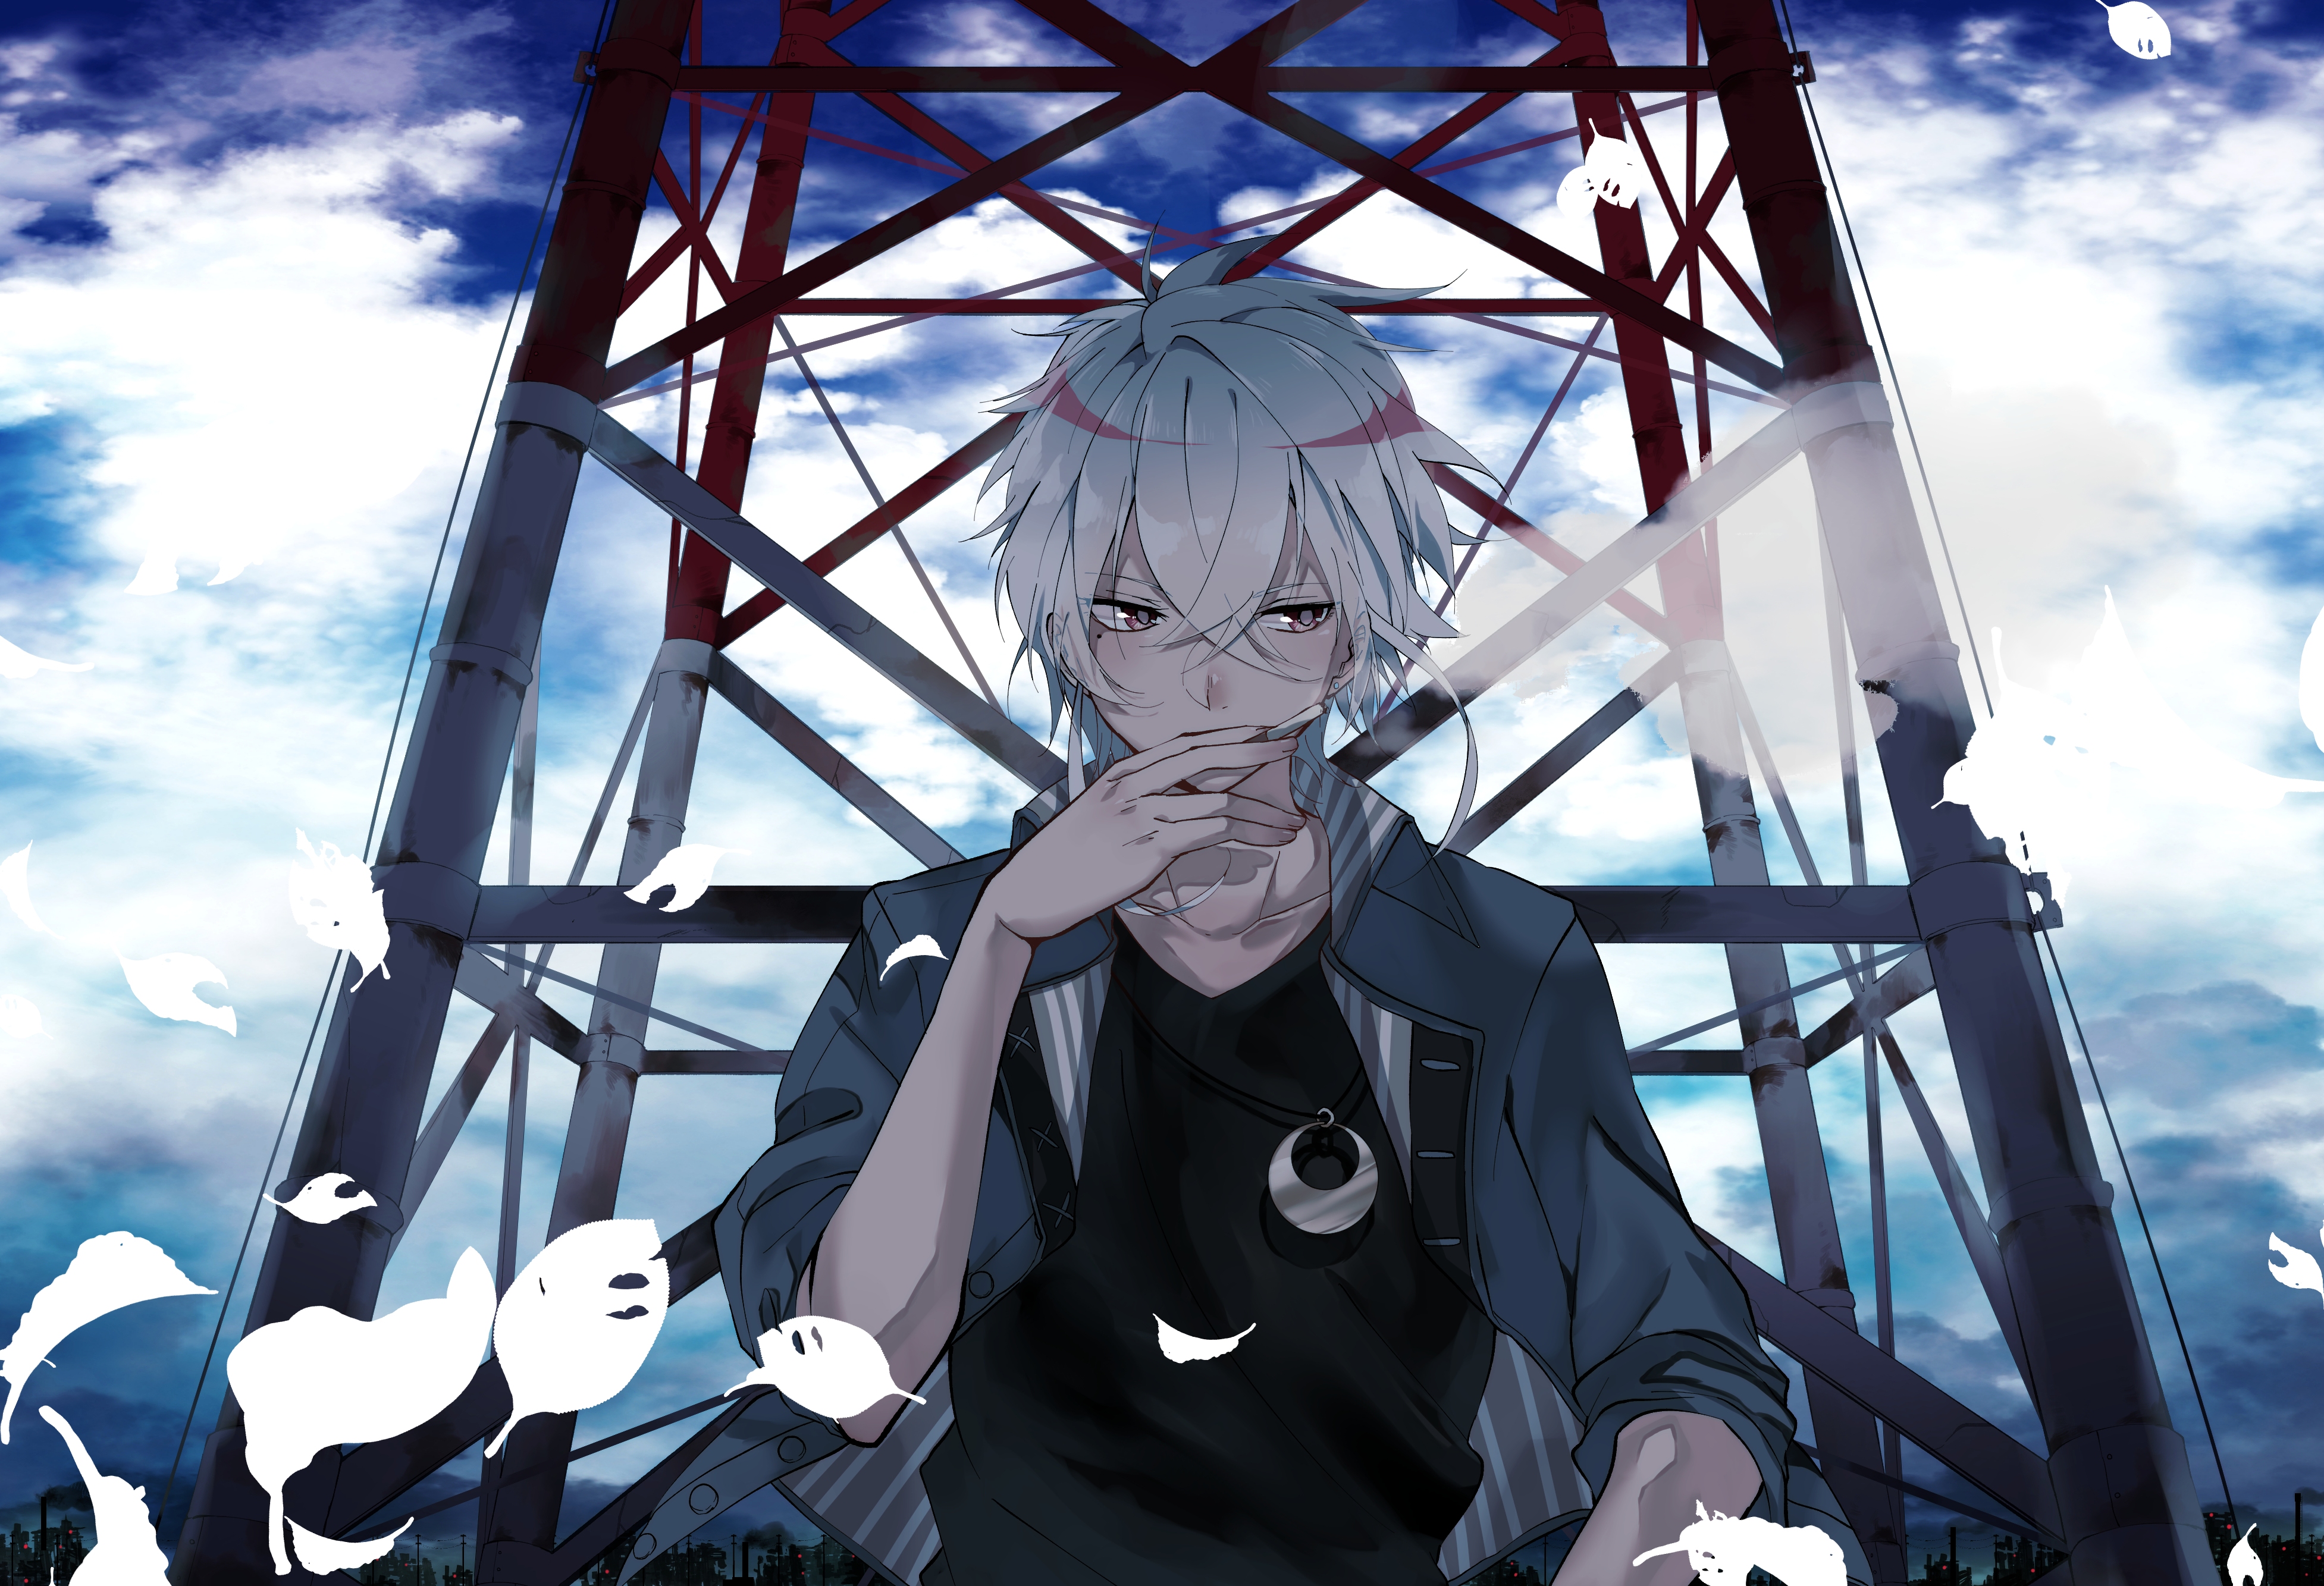 Smoking Tower Male Feathers Sky Clouds Anime Necklace White Hair Smoke Frontal View Cigarettes Looki 3907x2667